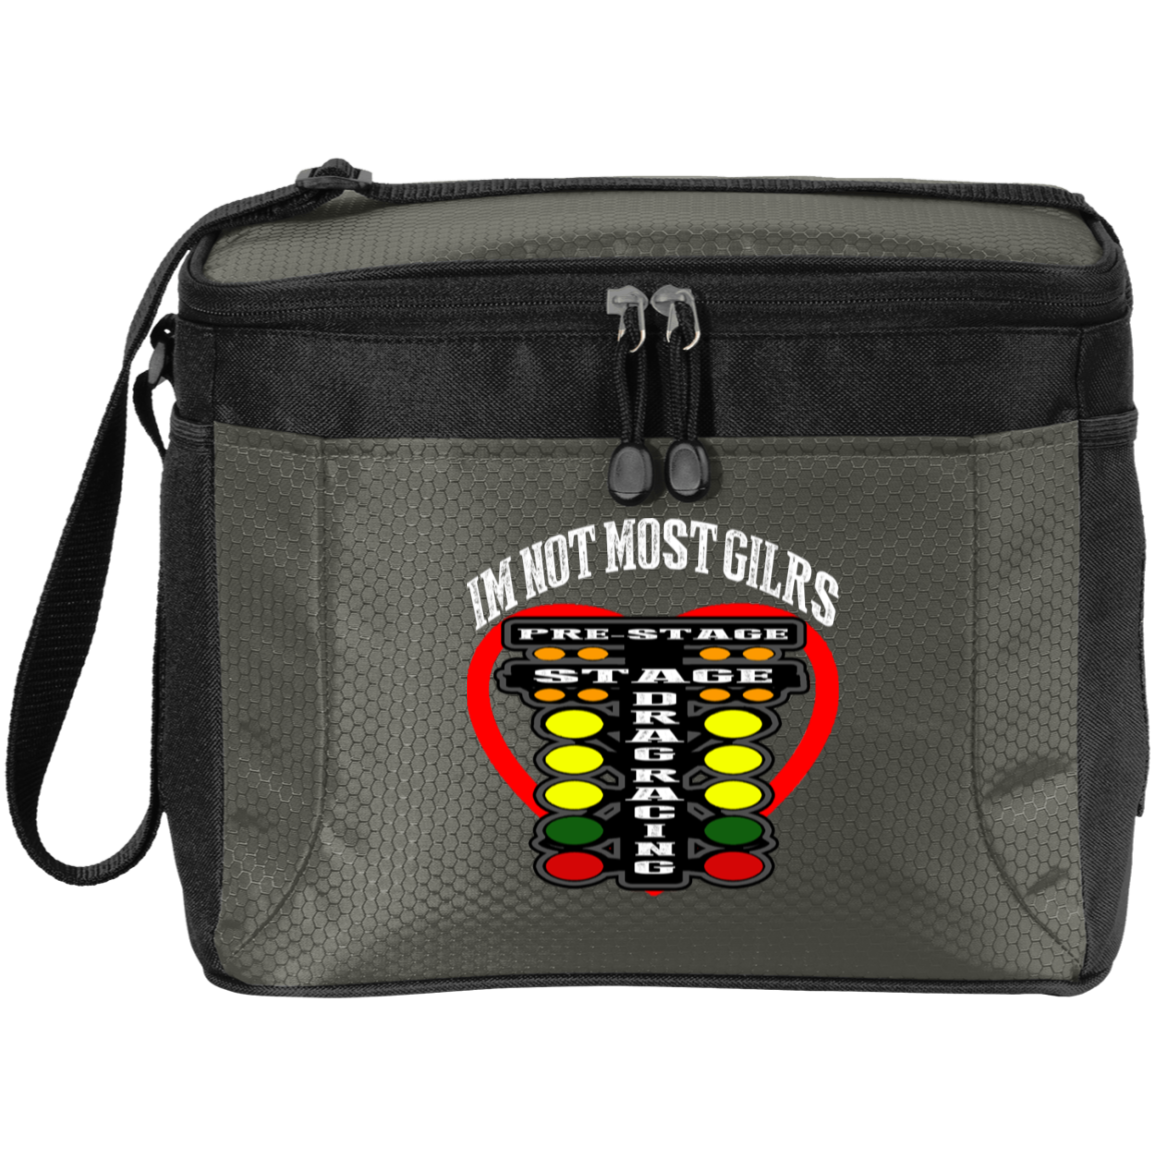 I'm Not Most Girls Drag Racing 12-Pack Cooler